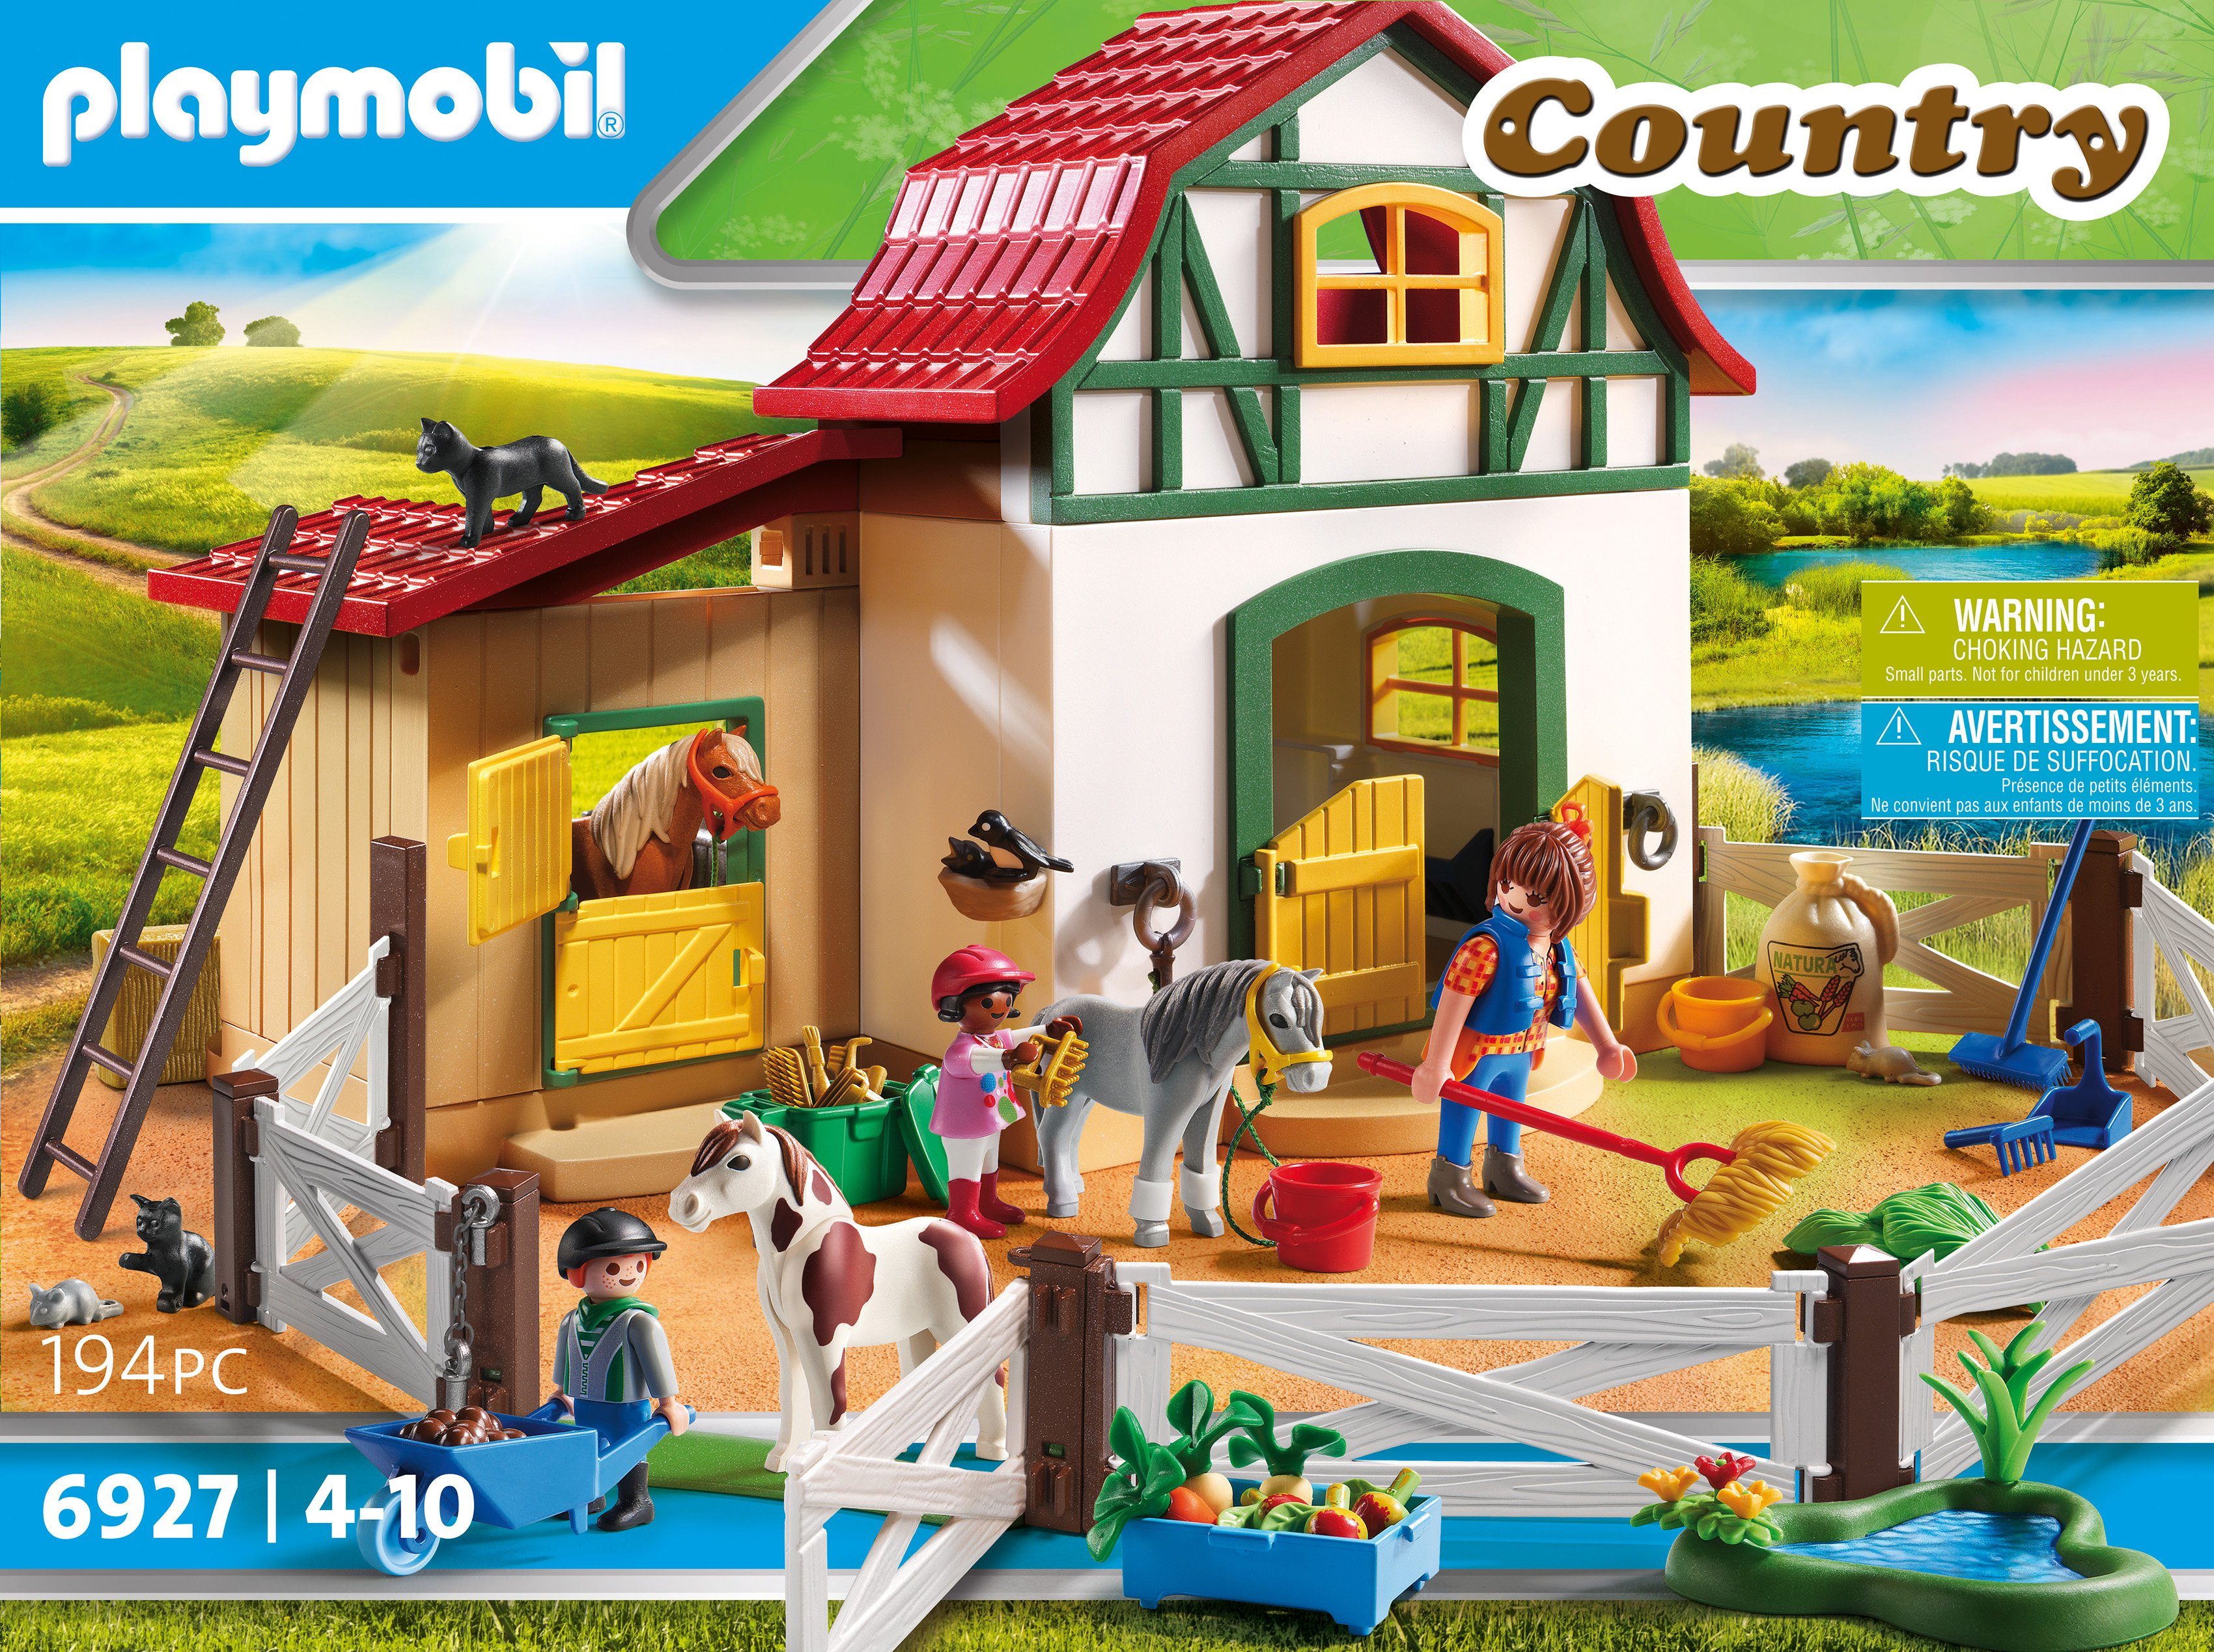 Playmobil® Konstruktions-Spielset Ponyhof (6927), Country, (194 St), Made in Germany